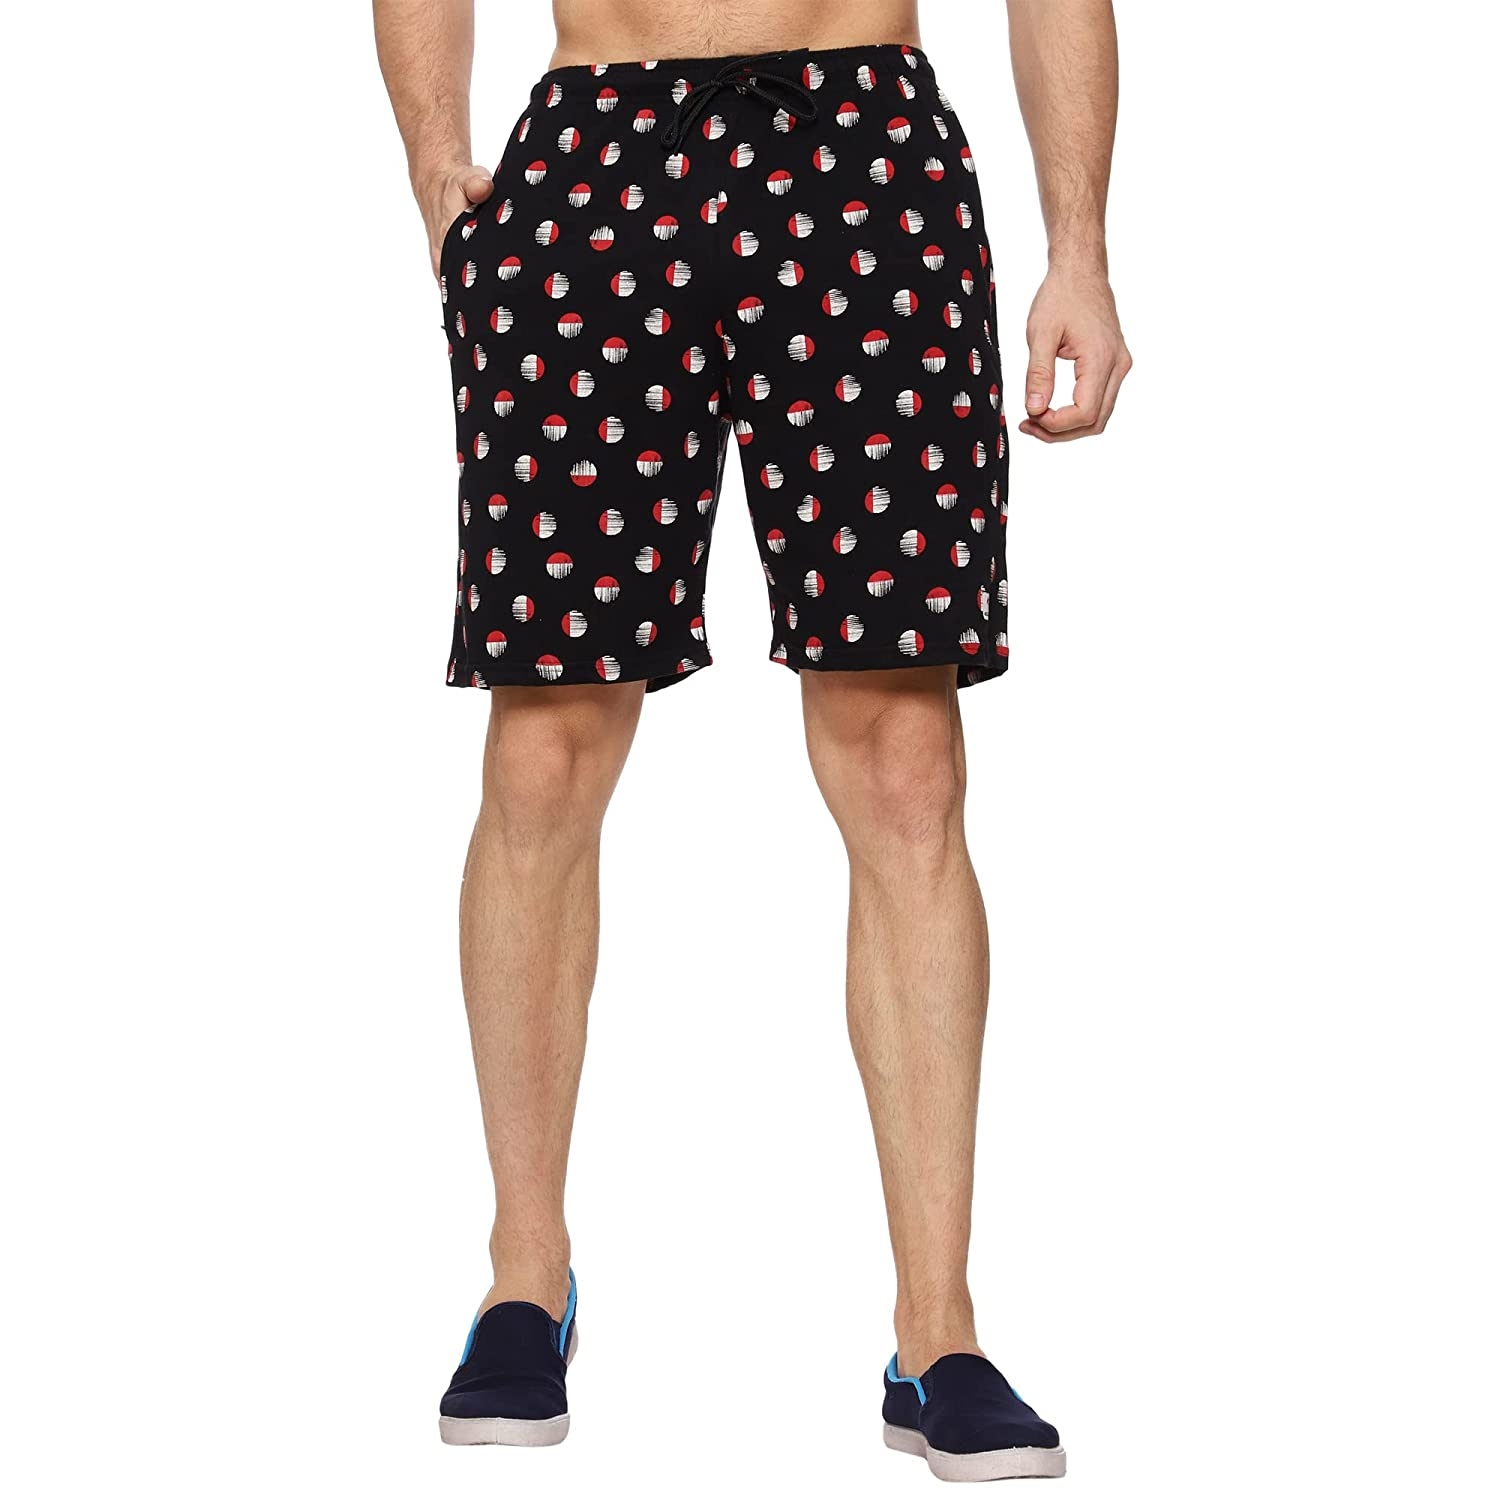 Moovfree | Moovfree Mens Cotton Bermuda Printed Casual Shorts Regular Fit Lounge Shorts with Zip Pockets, Red and White Circle on Black 